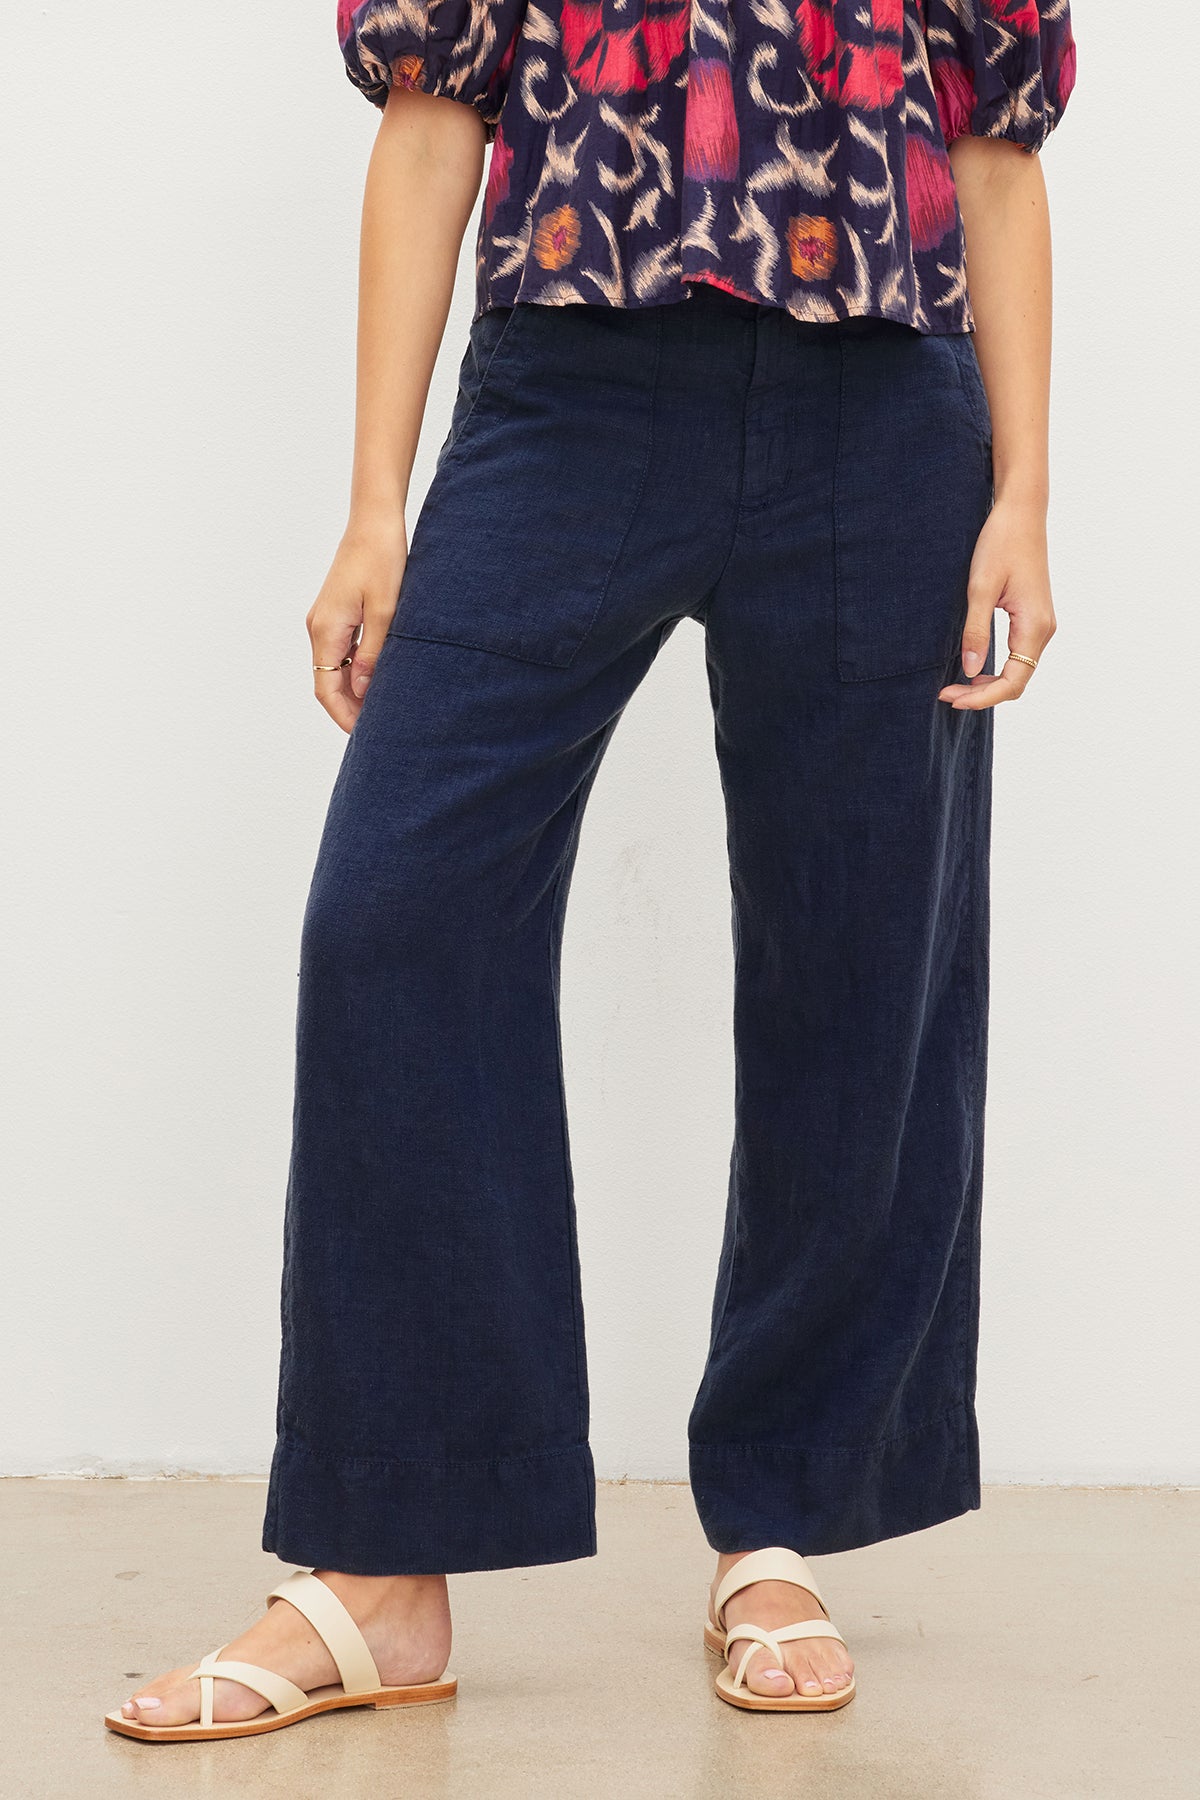 A stylish woman wearing a cool floral top and Velvet by Graham & Spencer DRU HEAVY LINEN PANT wide leg pants.-35982296088769